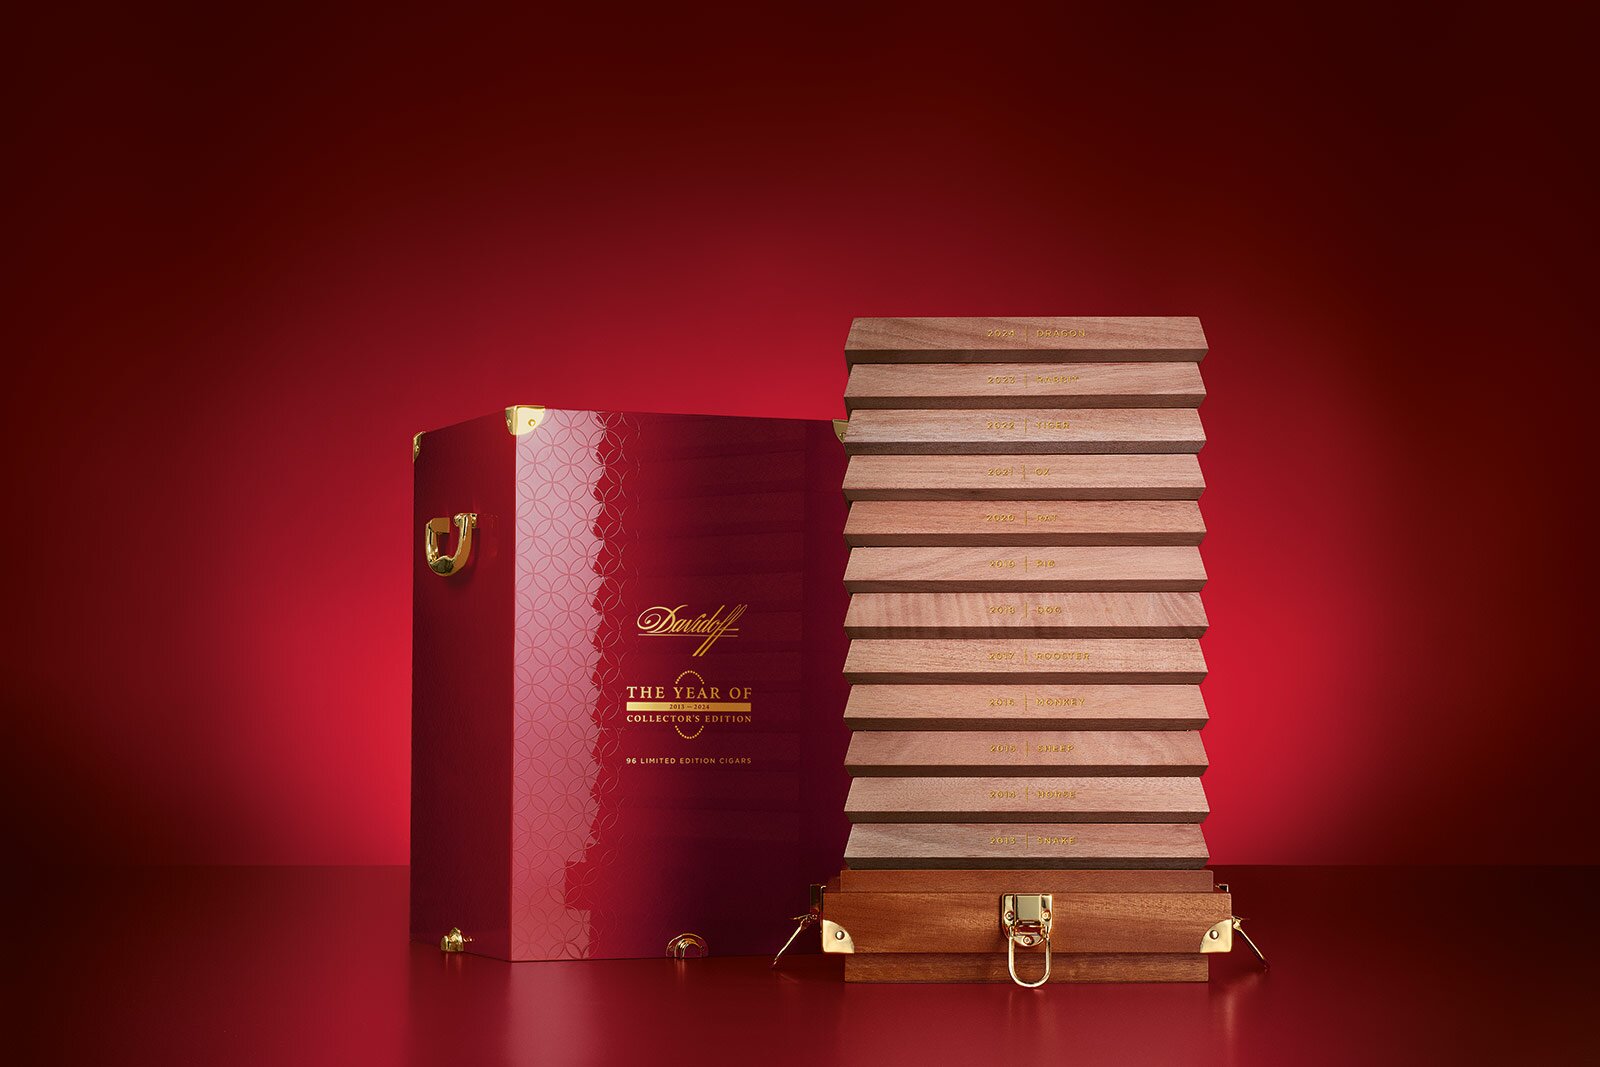 The Year of Collector’s Edition